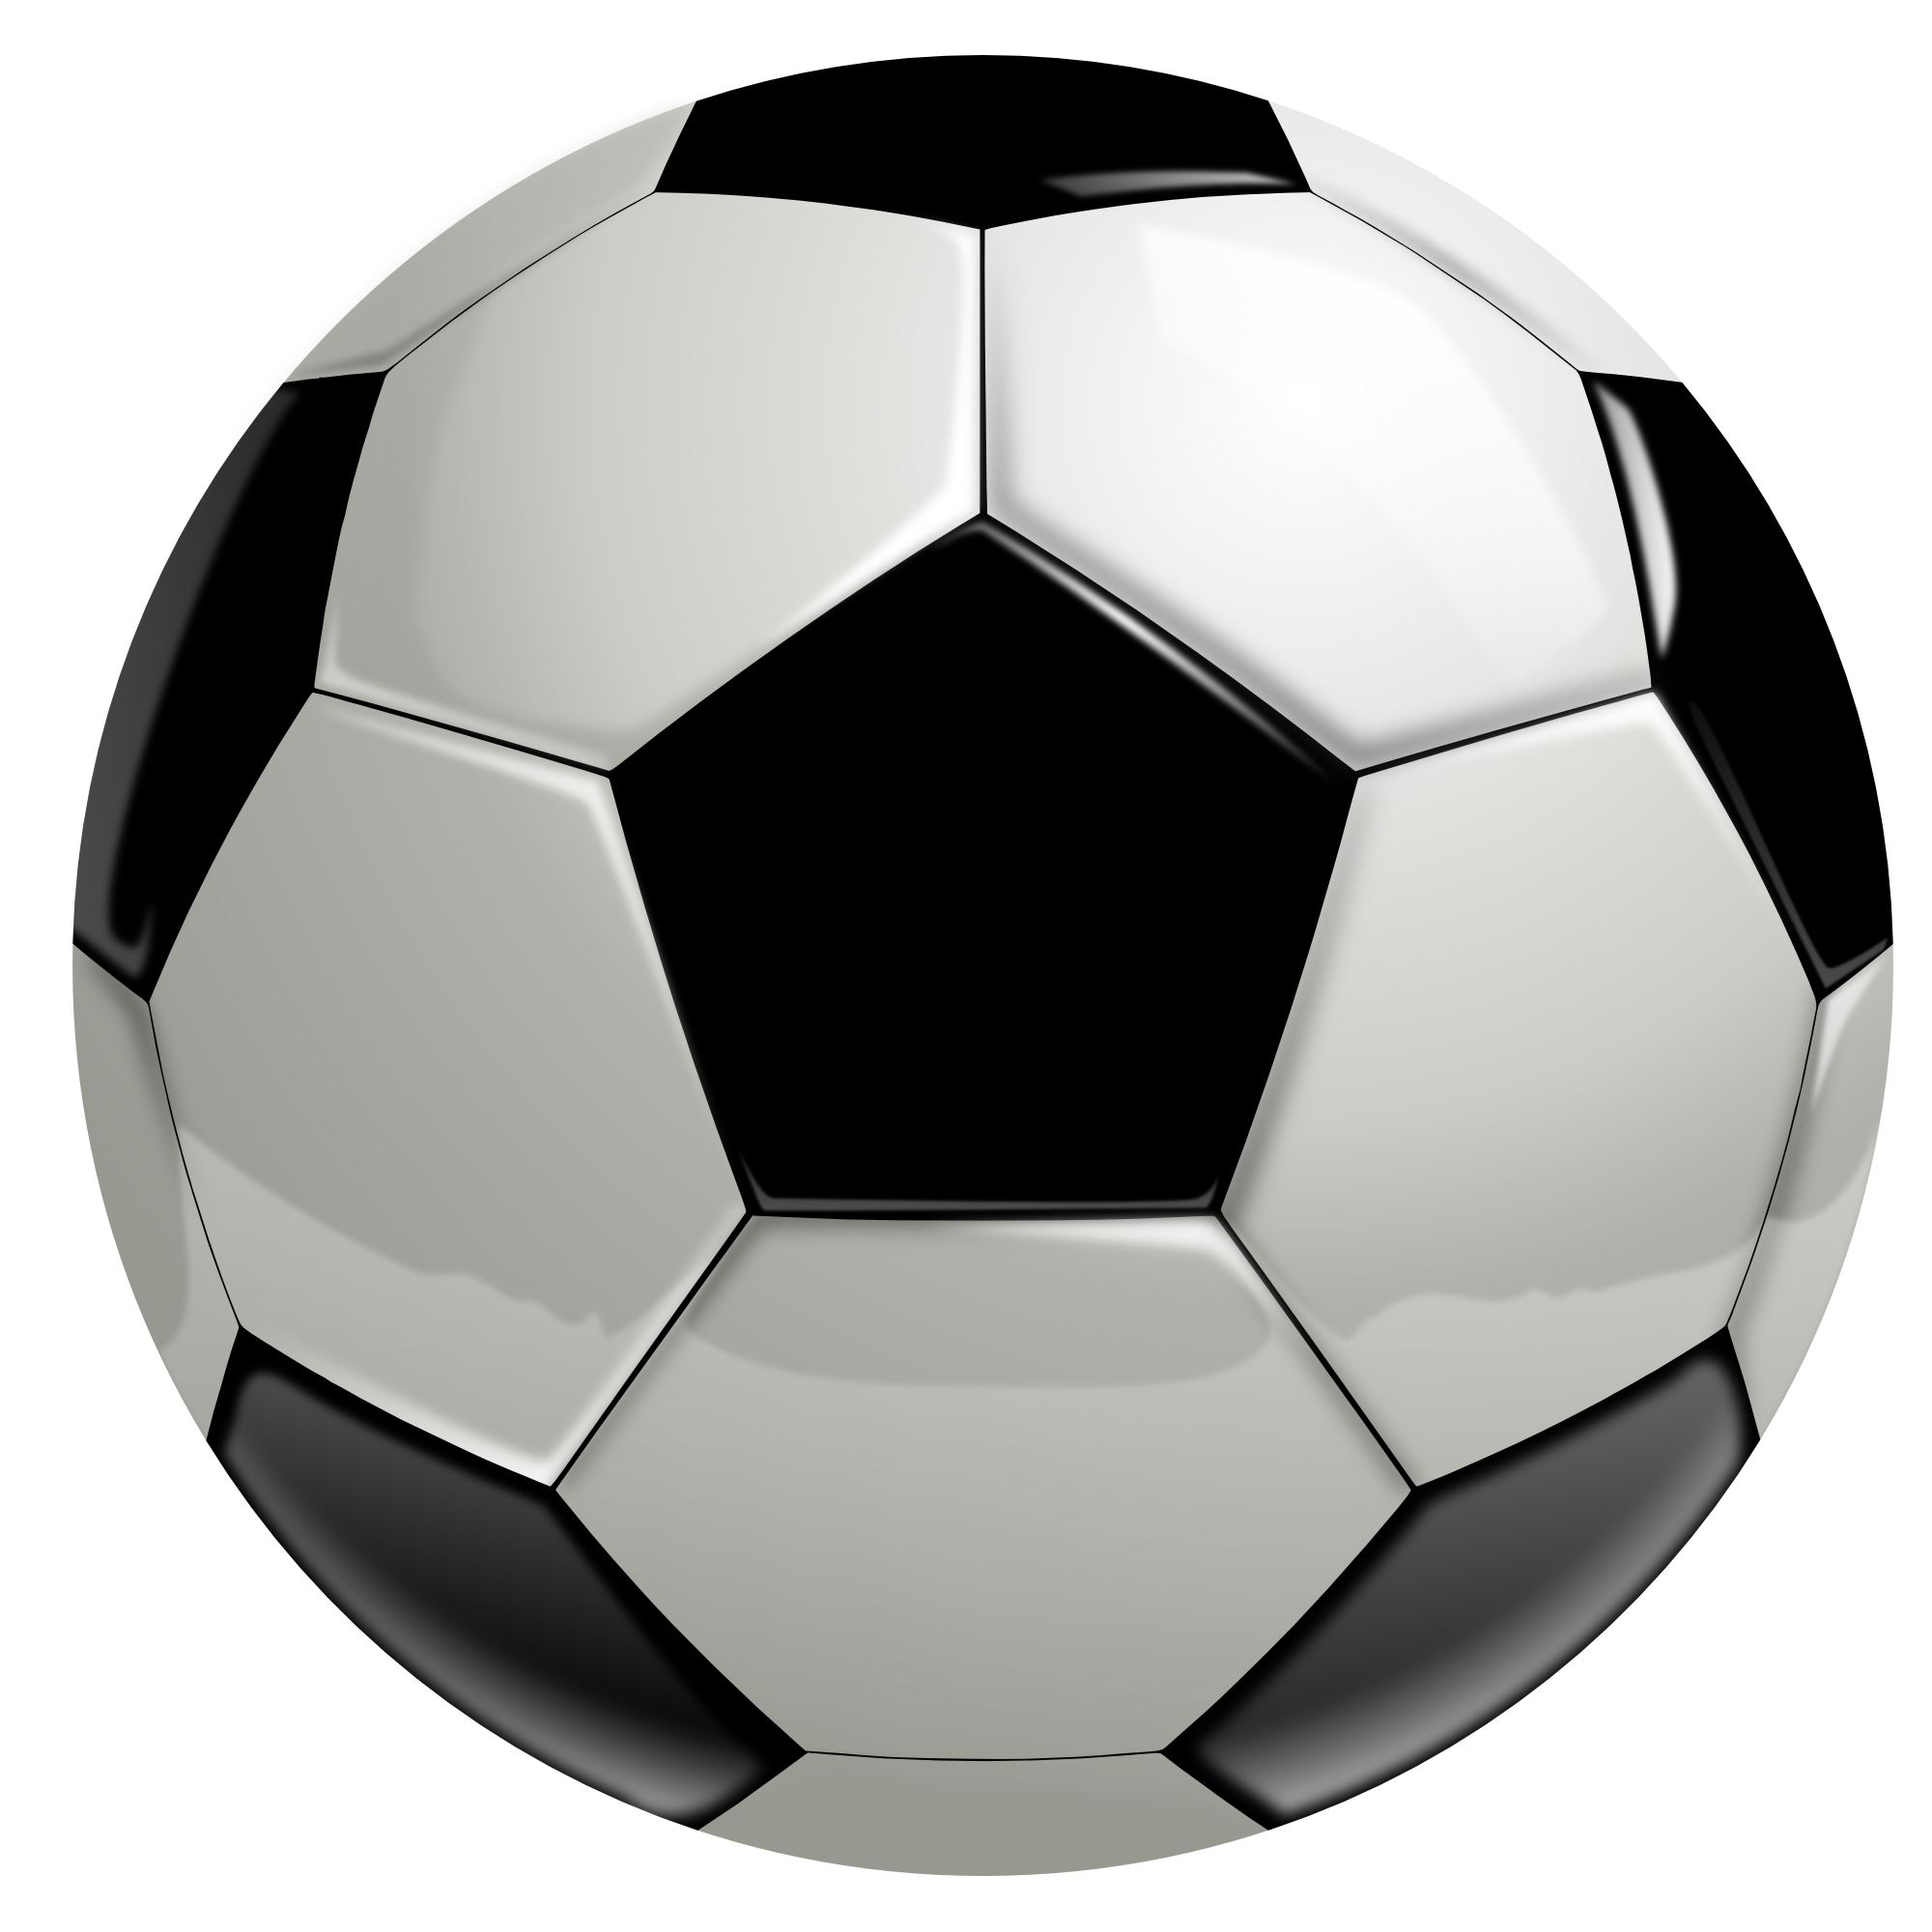 3D Soccer Ball Transparent Image With Shadows png #42418